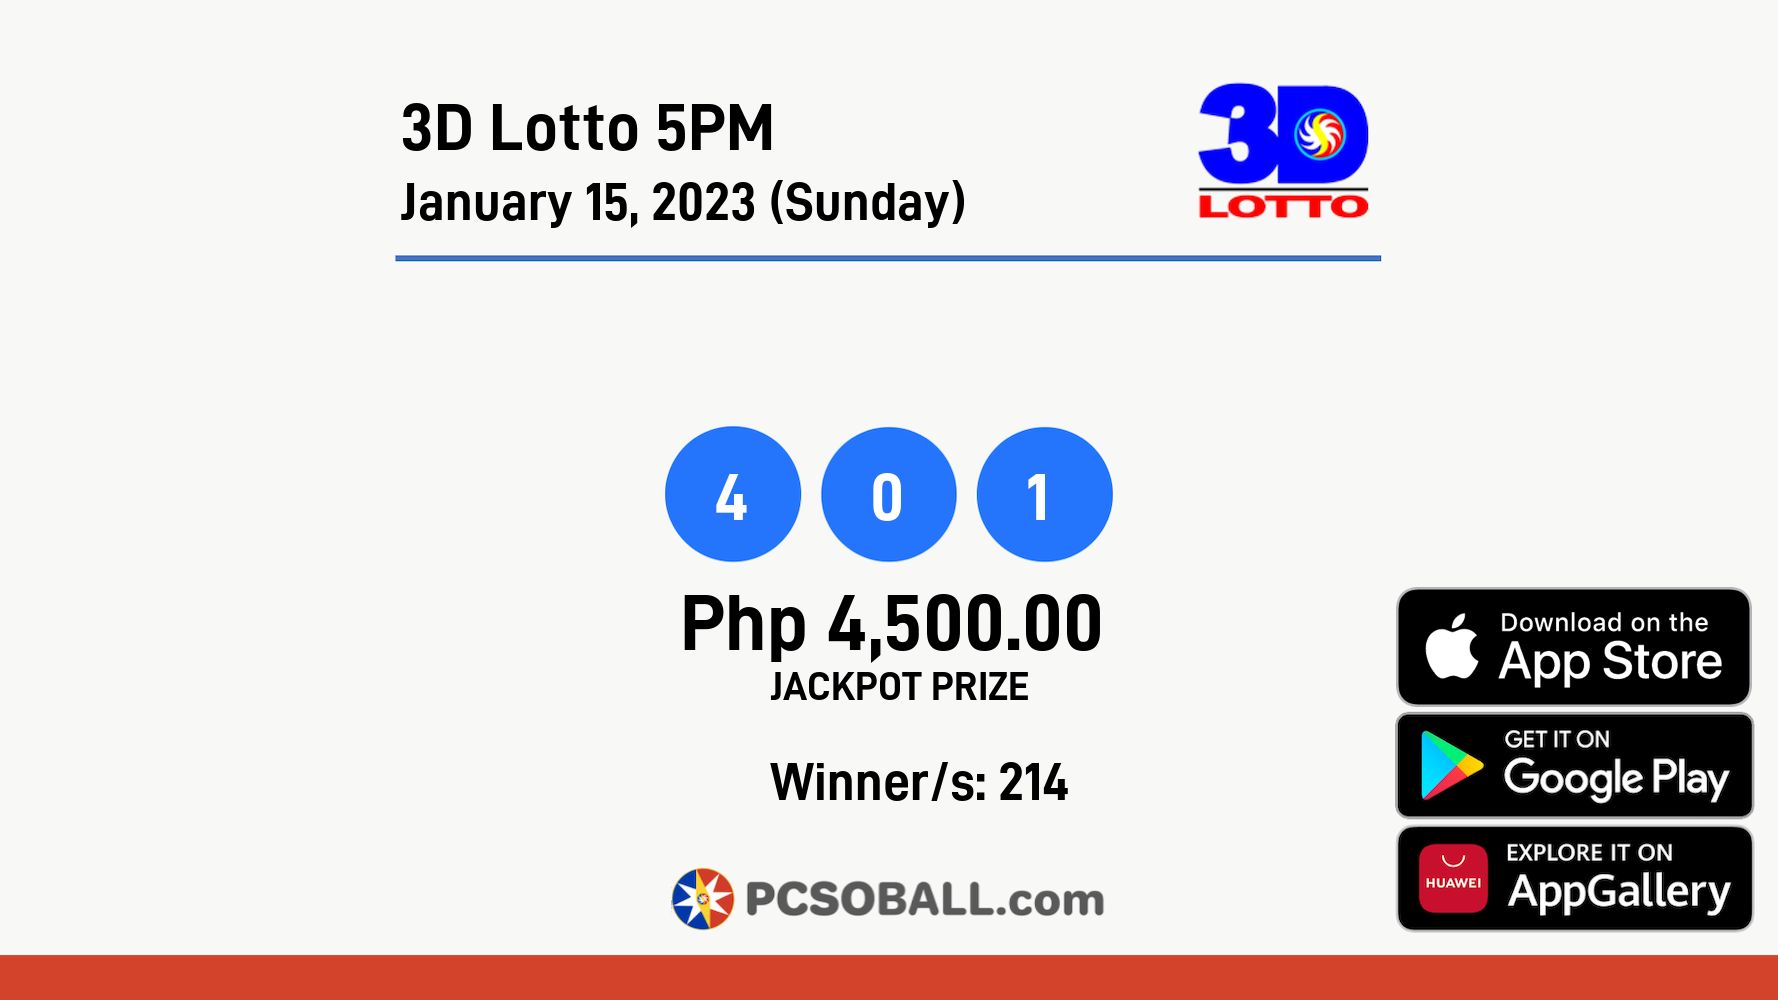 3D Lotto 5PM January 15, 2023 (Sunday) Result